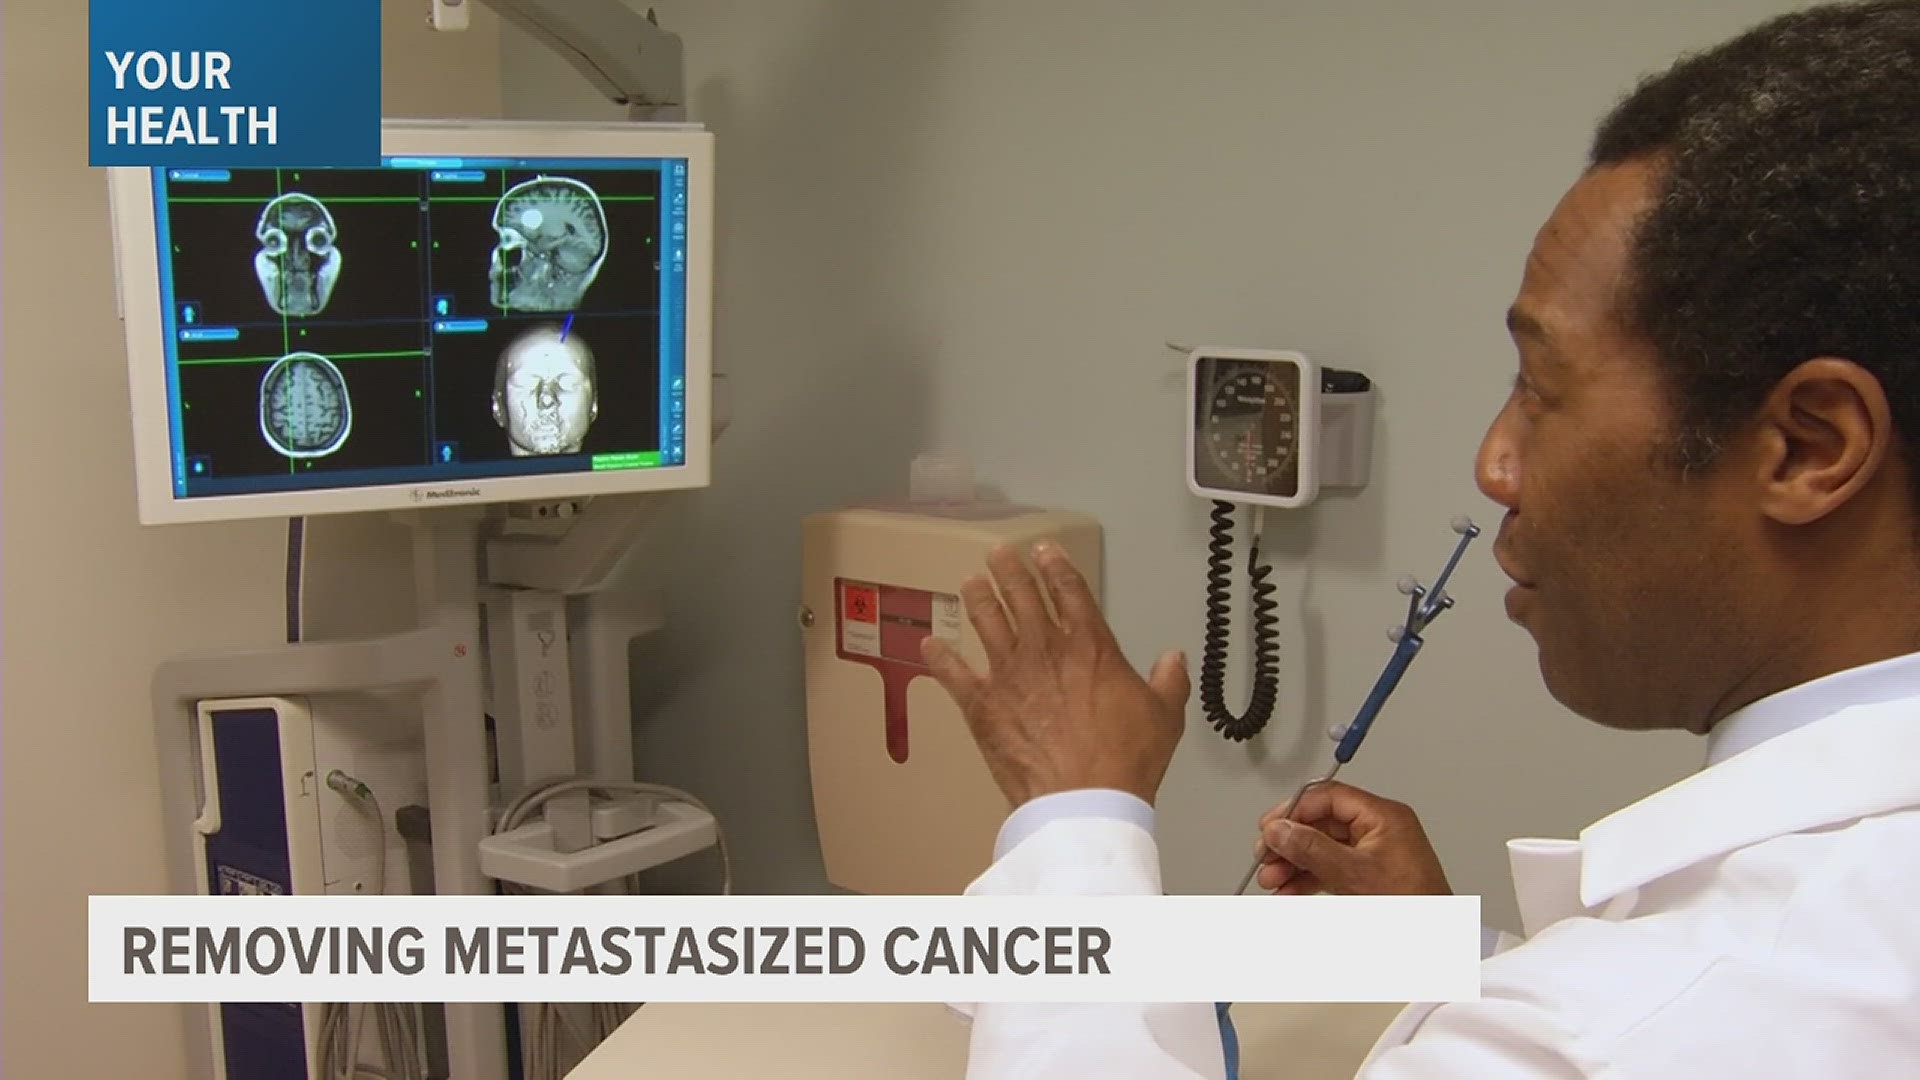 Cancer that metastasizes to the brain can be one of the most difficult to treat. So, doctors are incorporating new tools to beat this deadly foe.